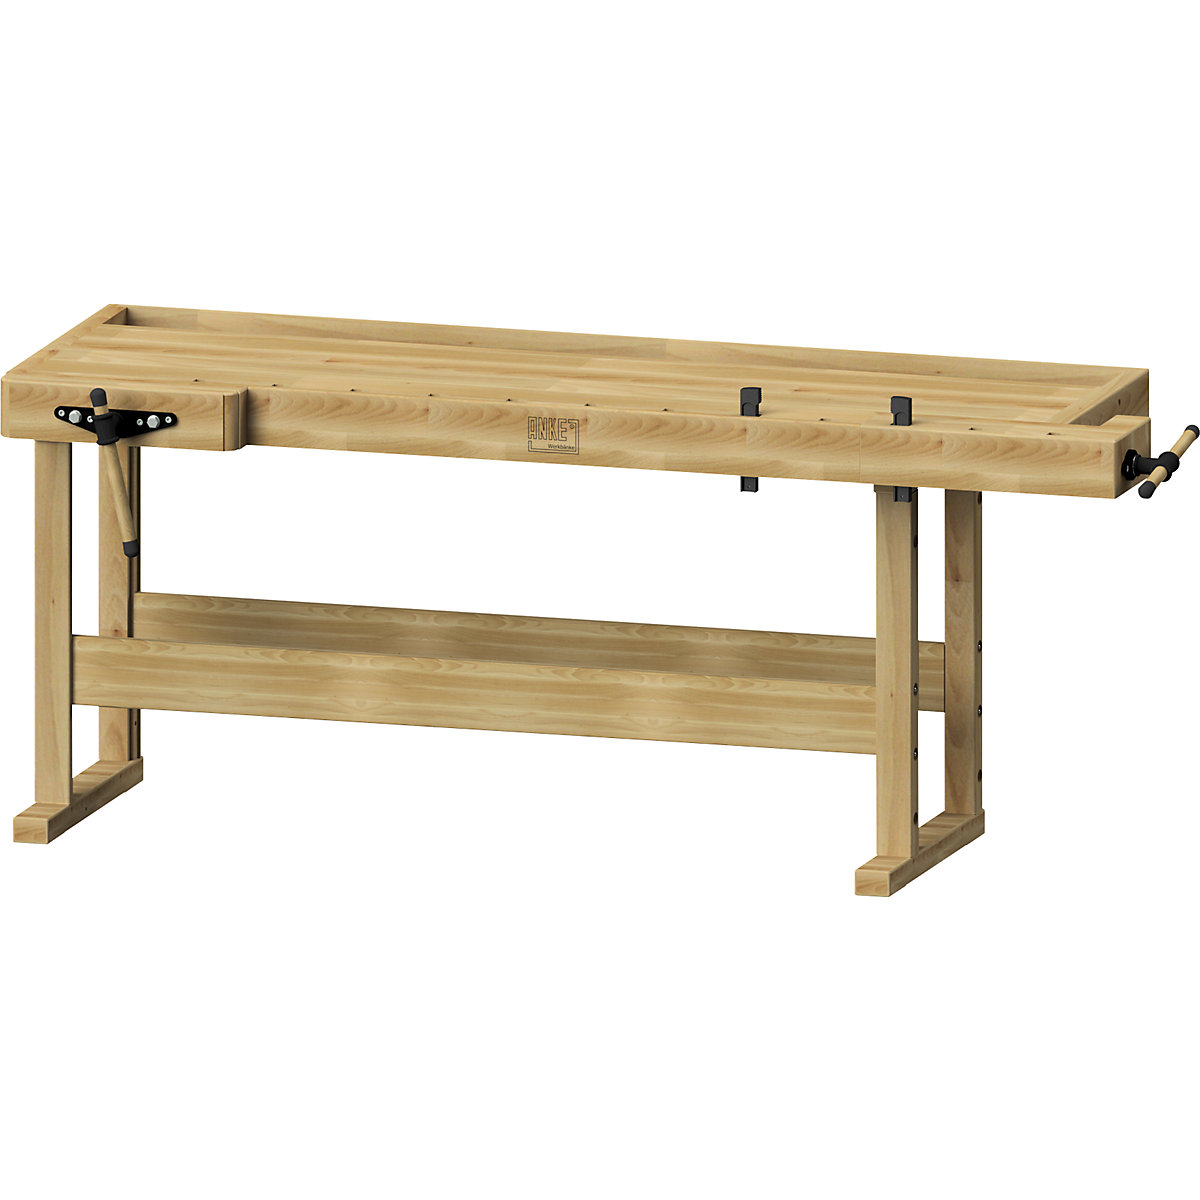 Professional carpenters' planing bench - ANKE